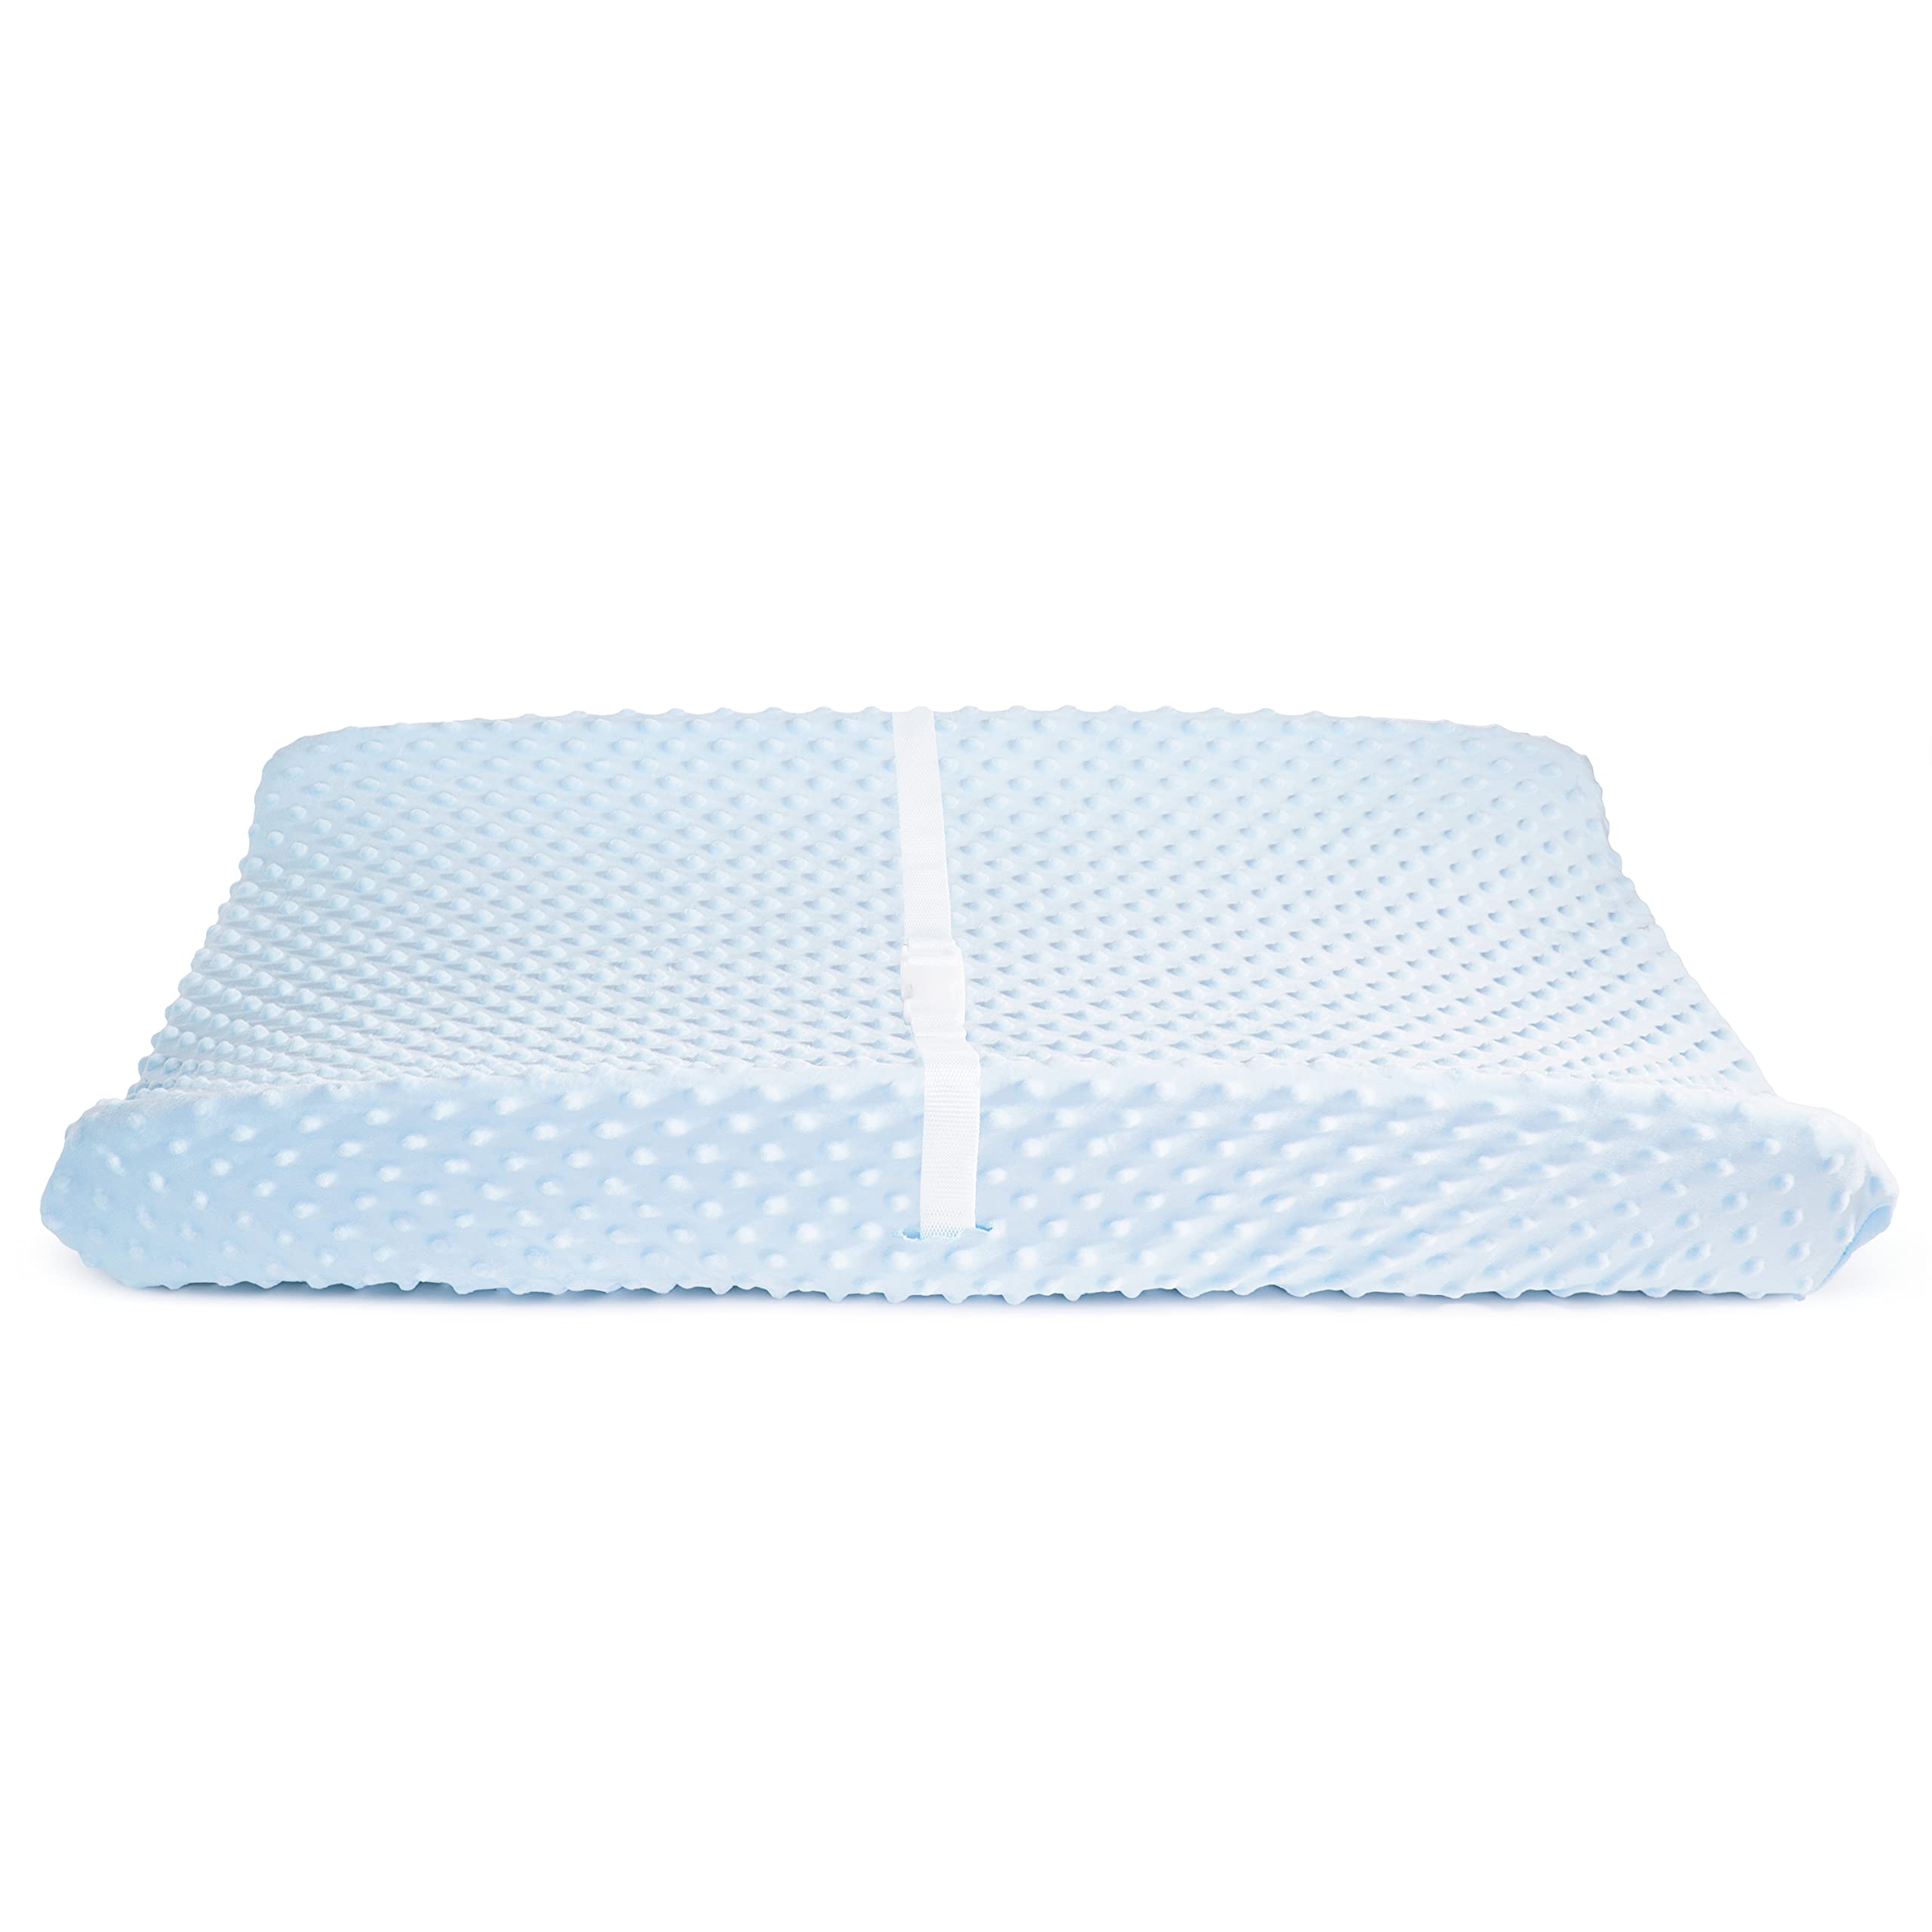 Munchkin® Diaper Changing Pad Covers, 2 Pack, Blue/White – Fits Standard Contoured Changing Pads